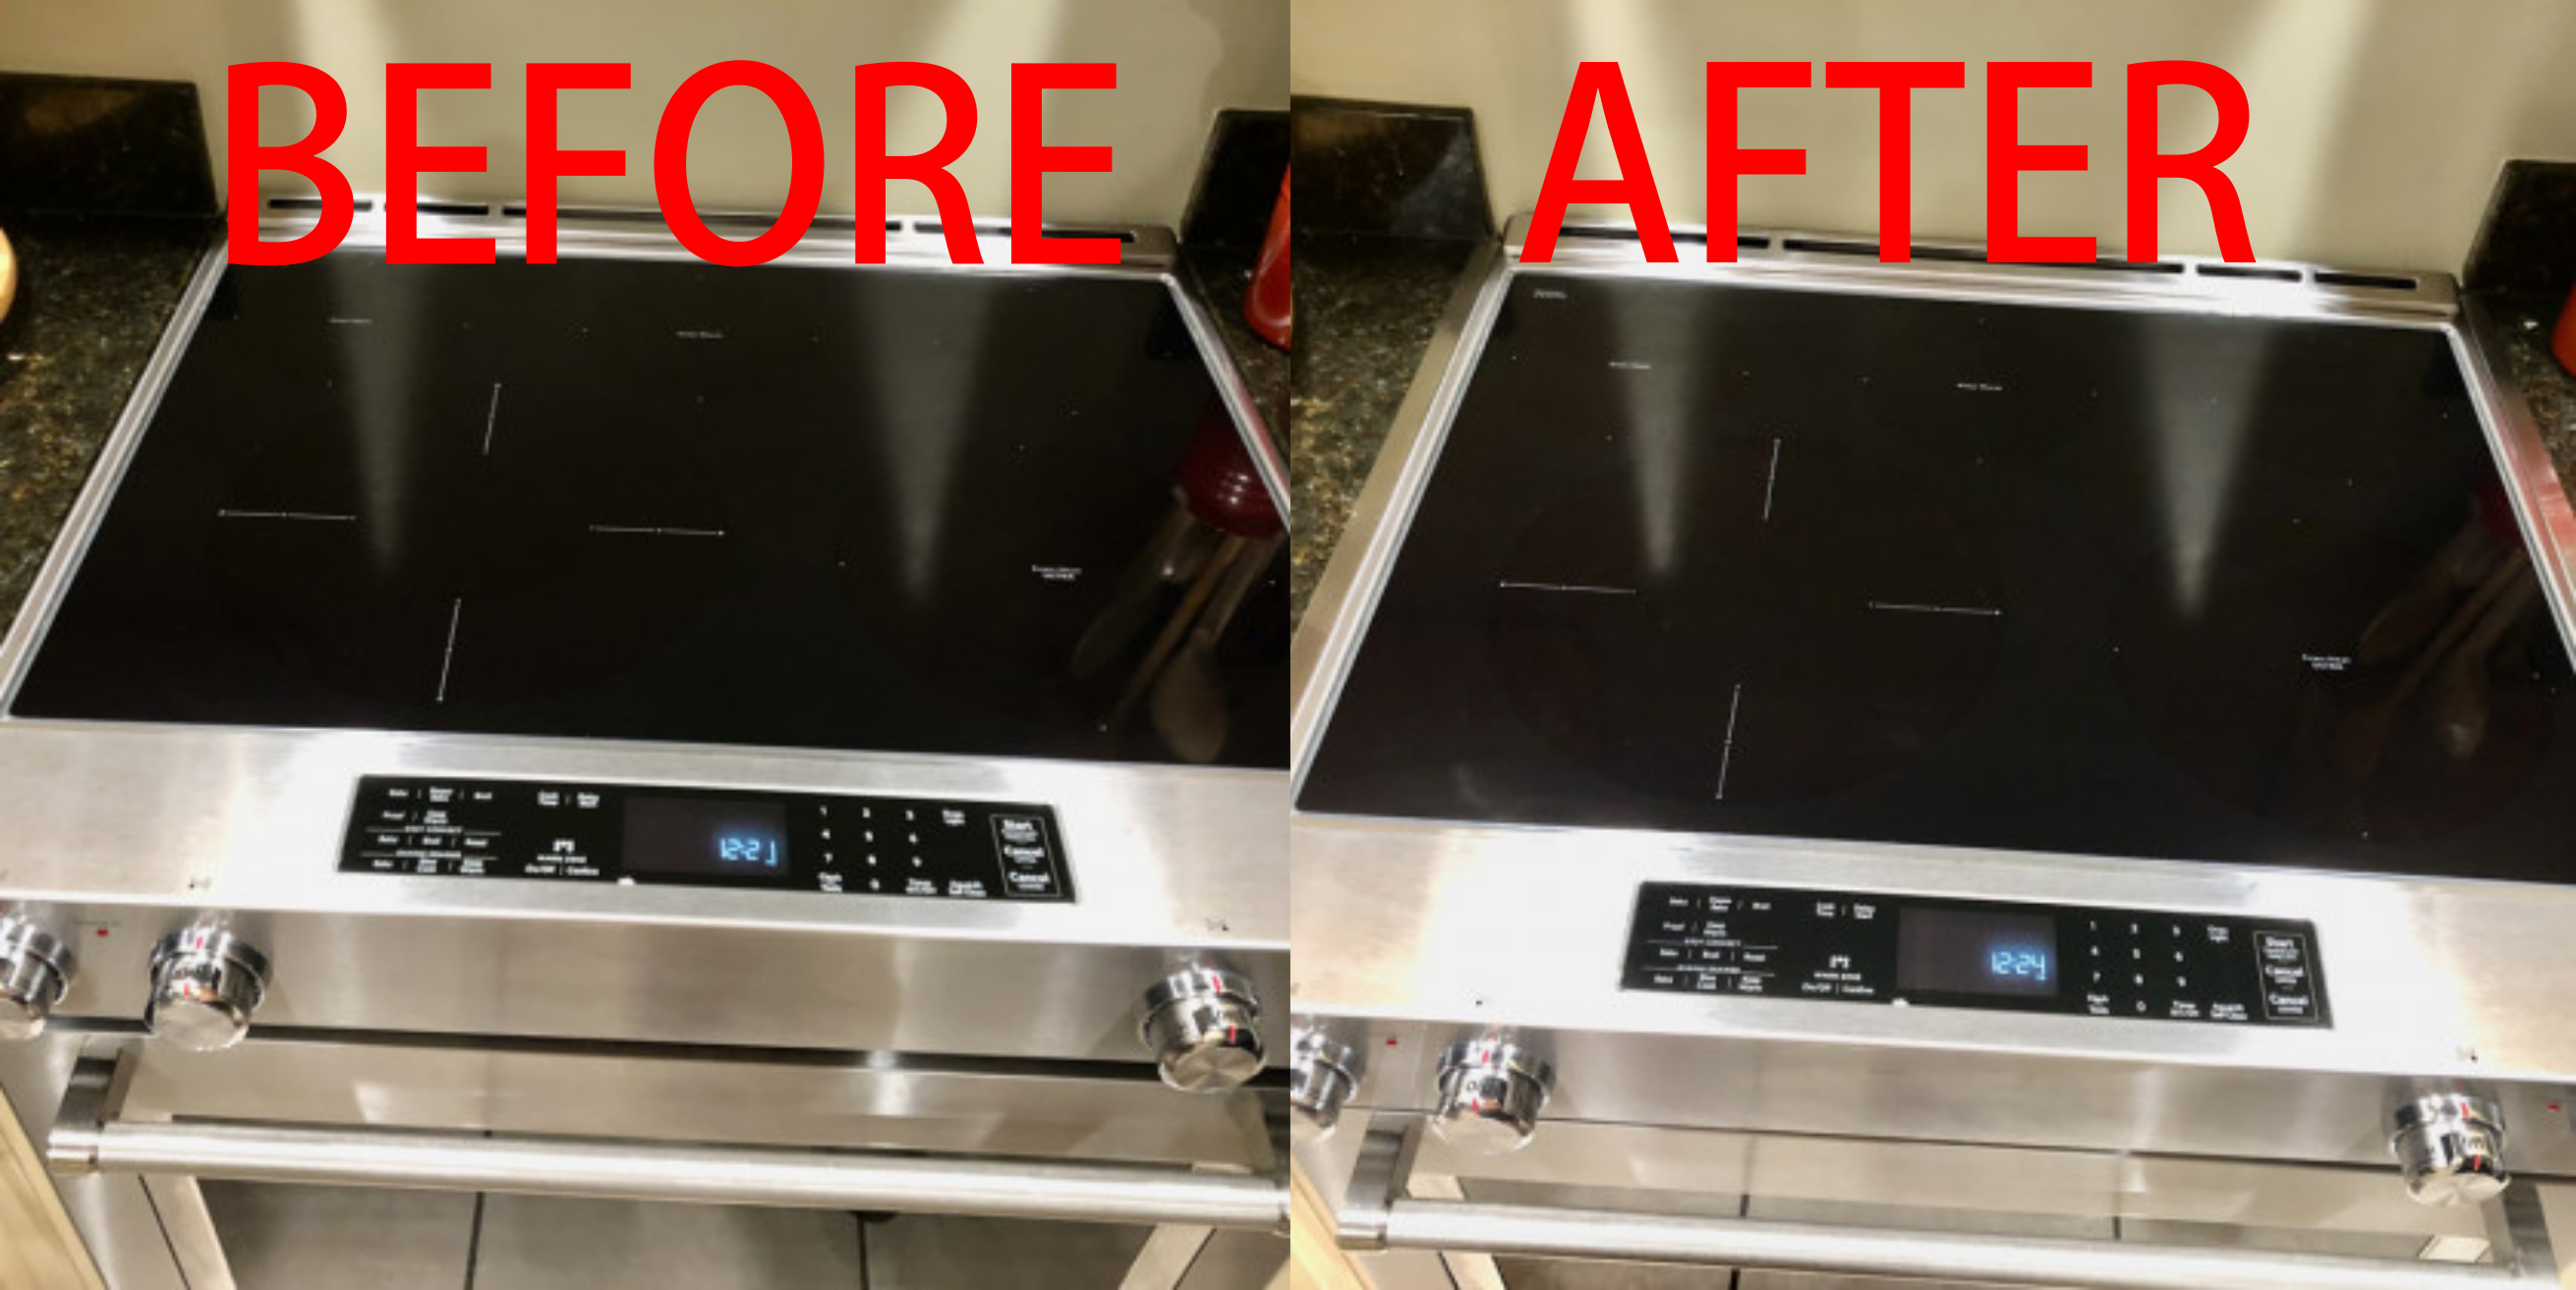 SIDE TRIM INSTALLATION BEFORE AND AFTER